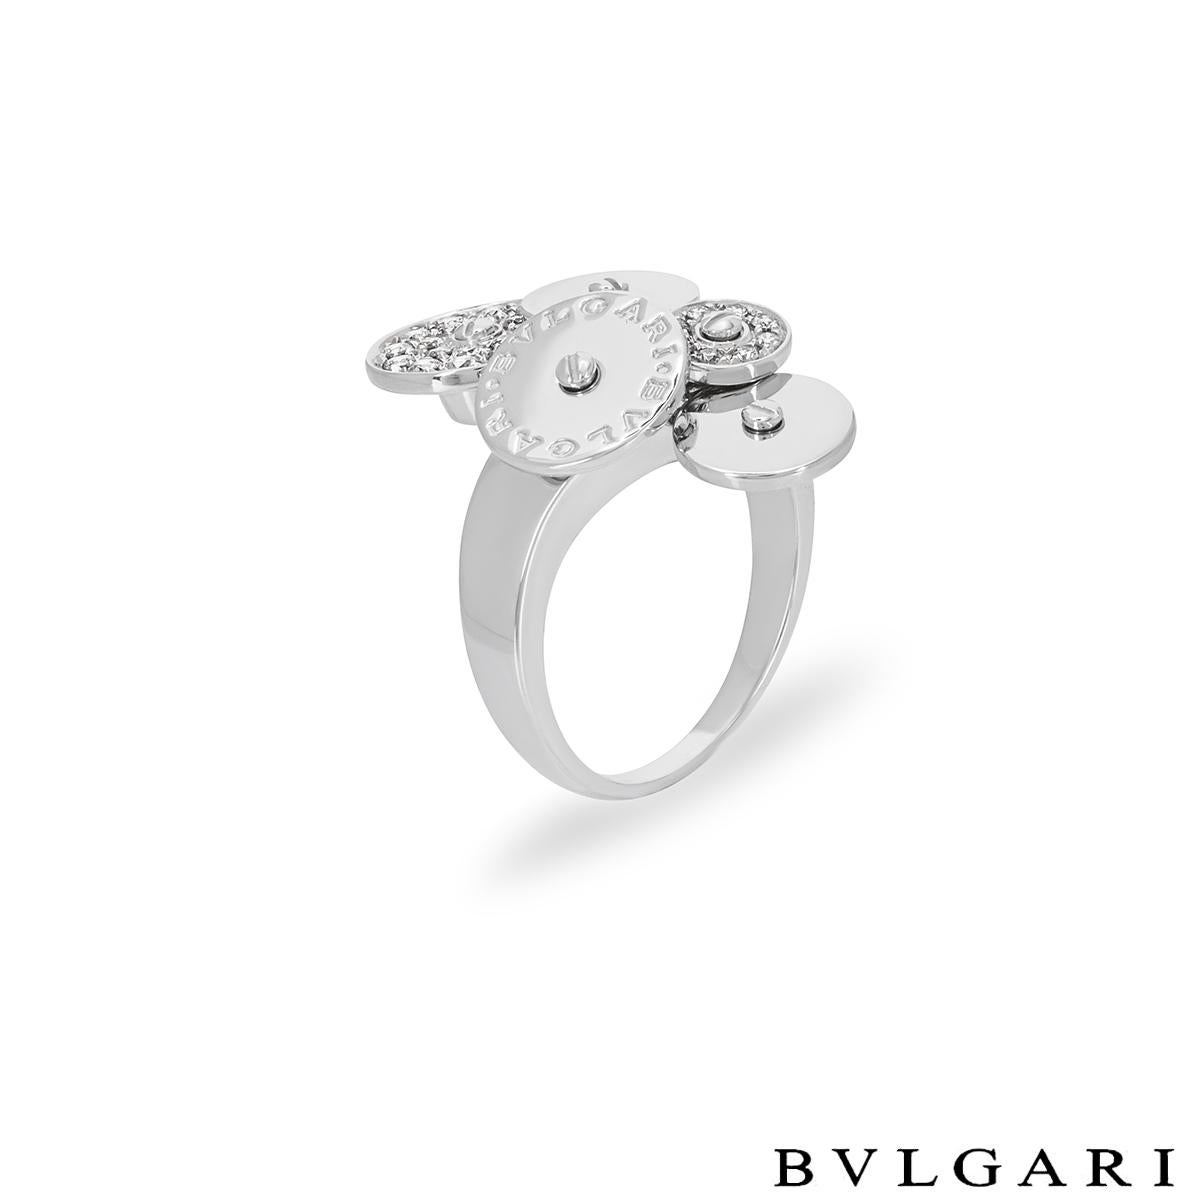 An 18k white gold diamond ring by Bvlgari from the Cicladi collection. The dress ring is composed of a cluster of 5 circular spinning discs, each alternating in size. One of the discs is engraved with the Bvlgari Bvlgari logo, two of the discs are